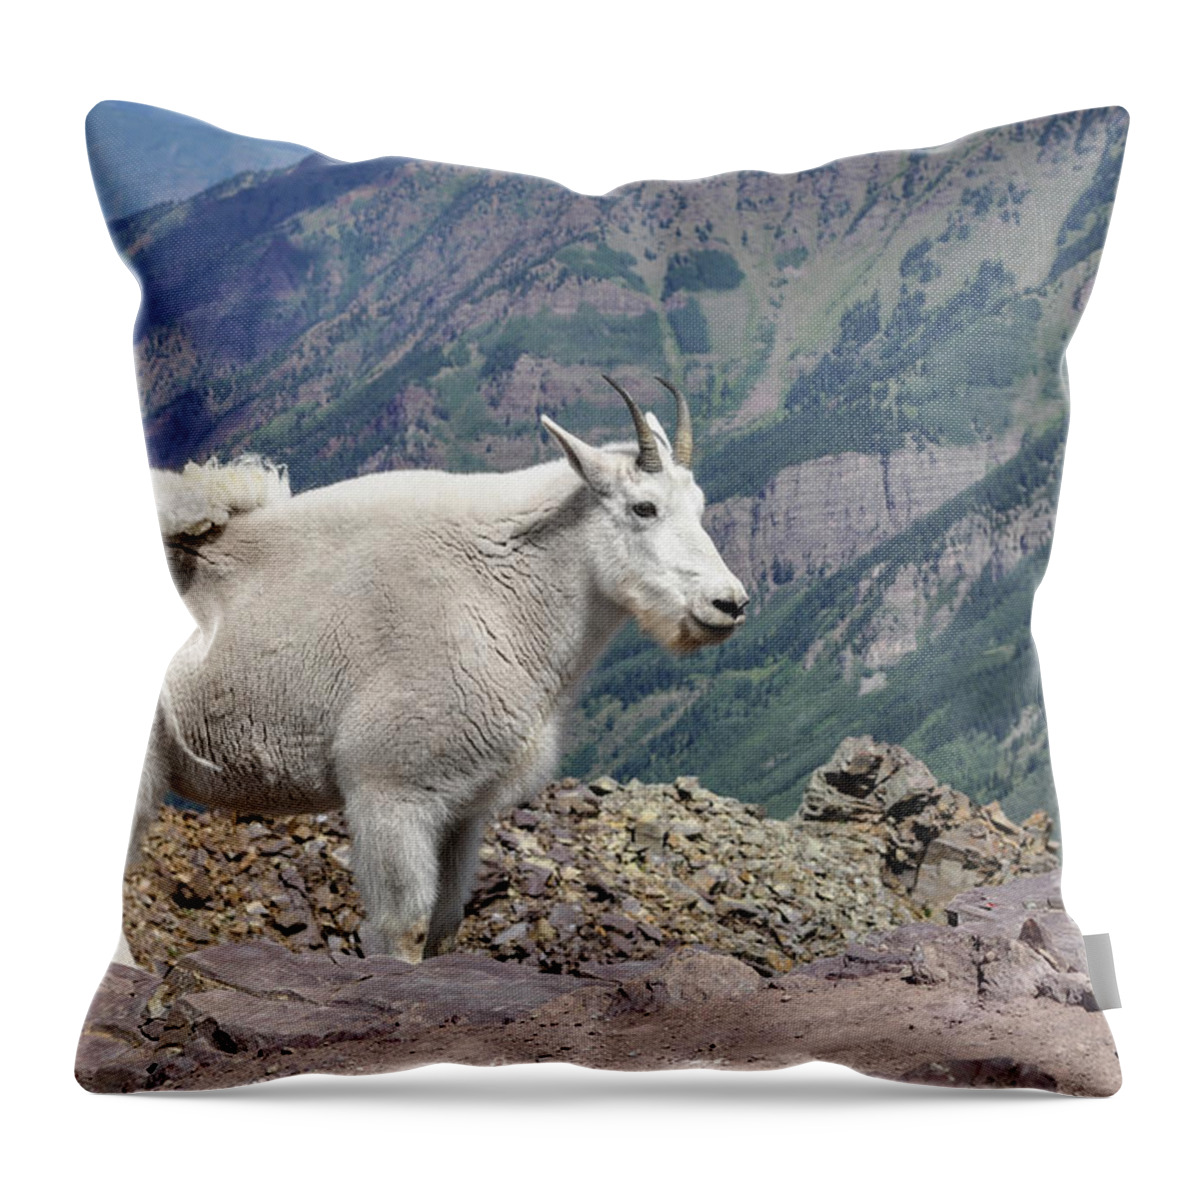 Mountain Throw Pillow featuring the photograph The Little Guy by Aaron Spong